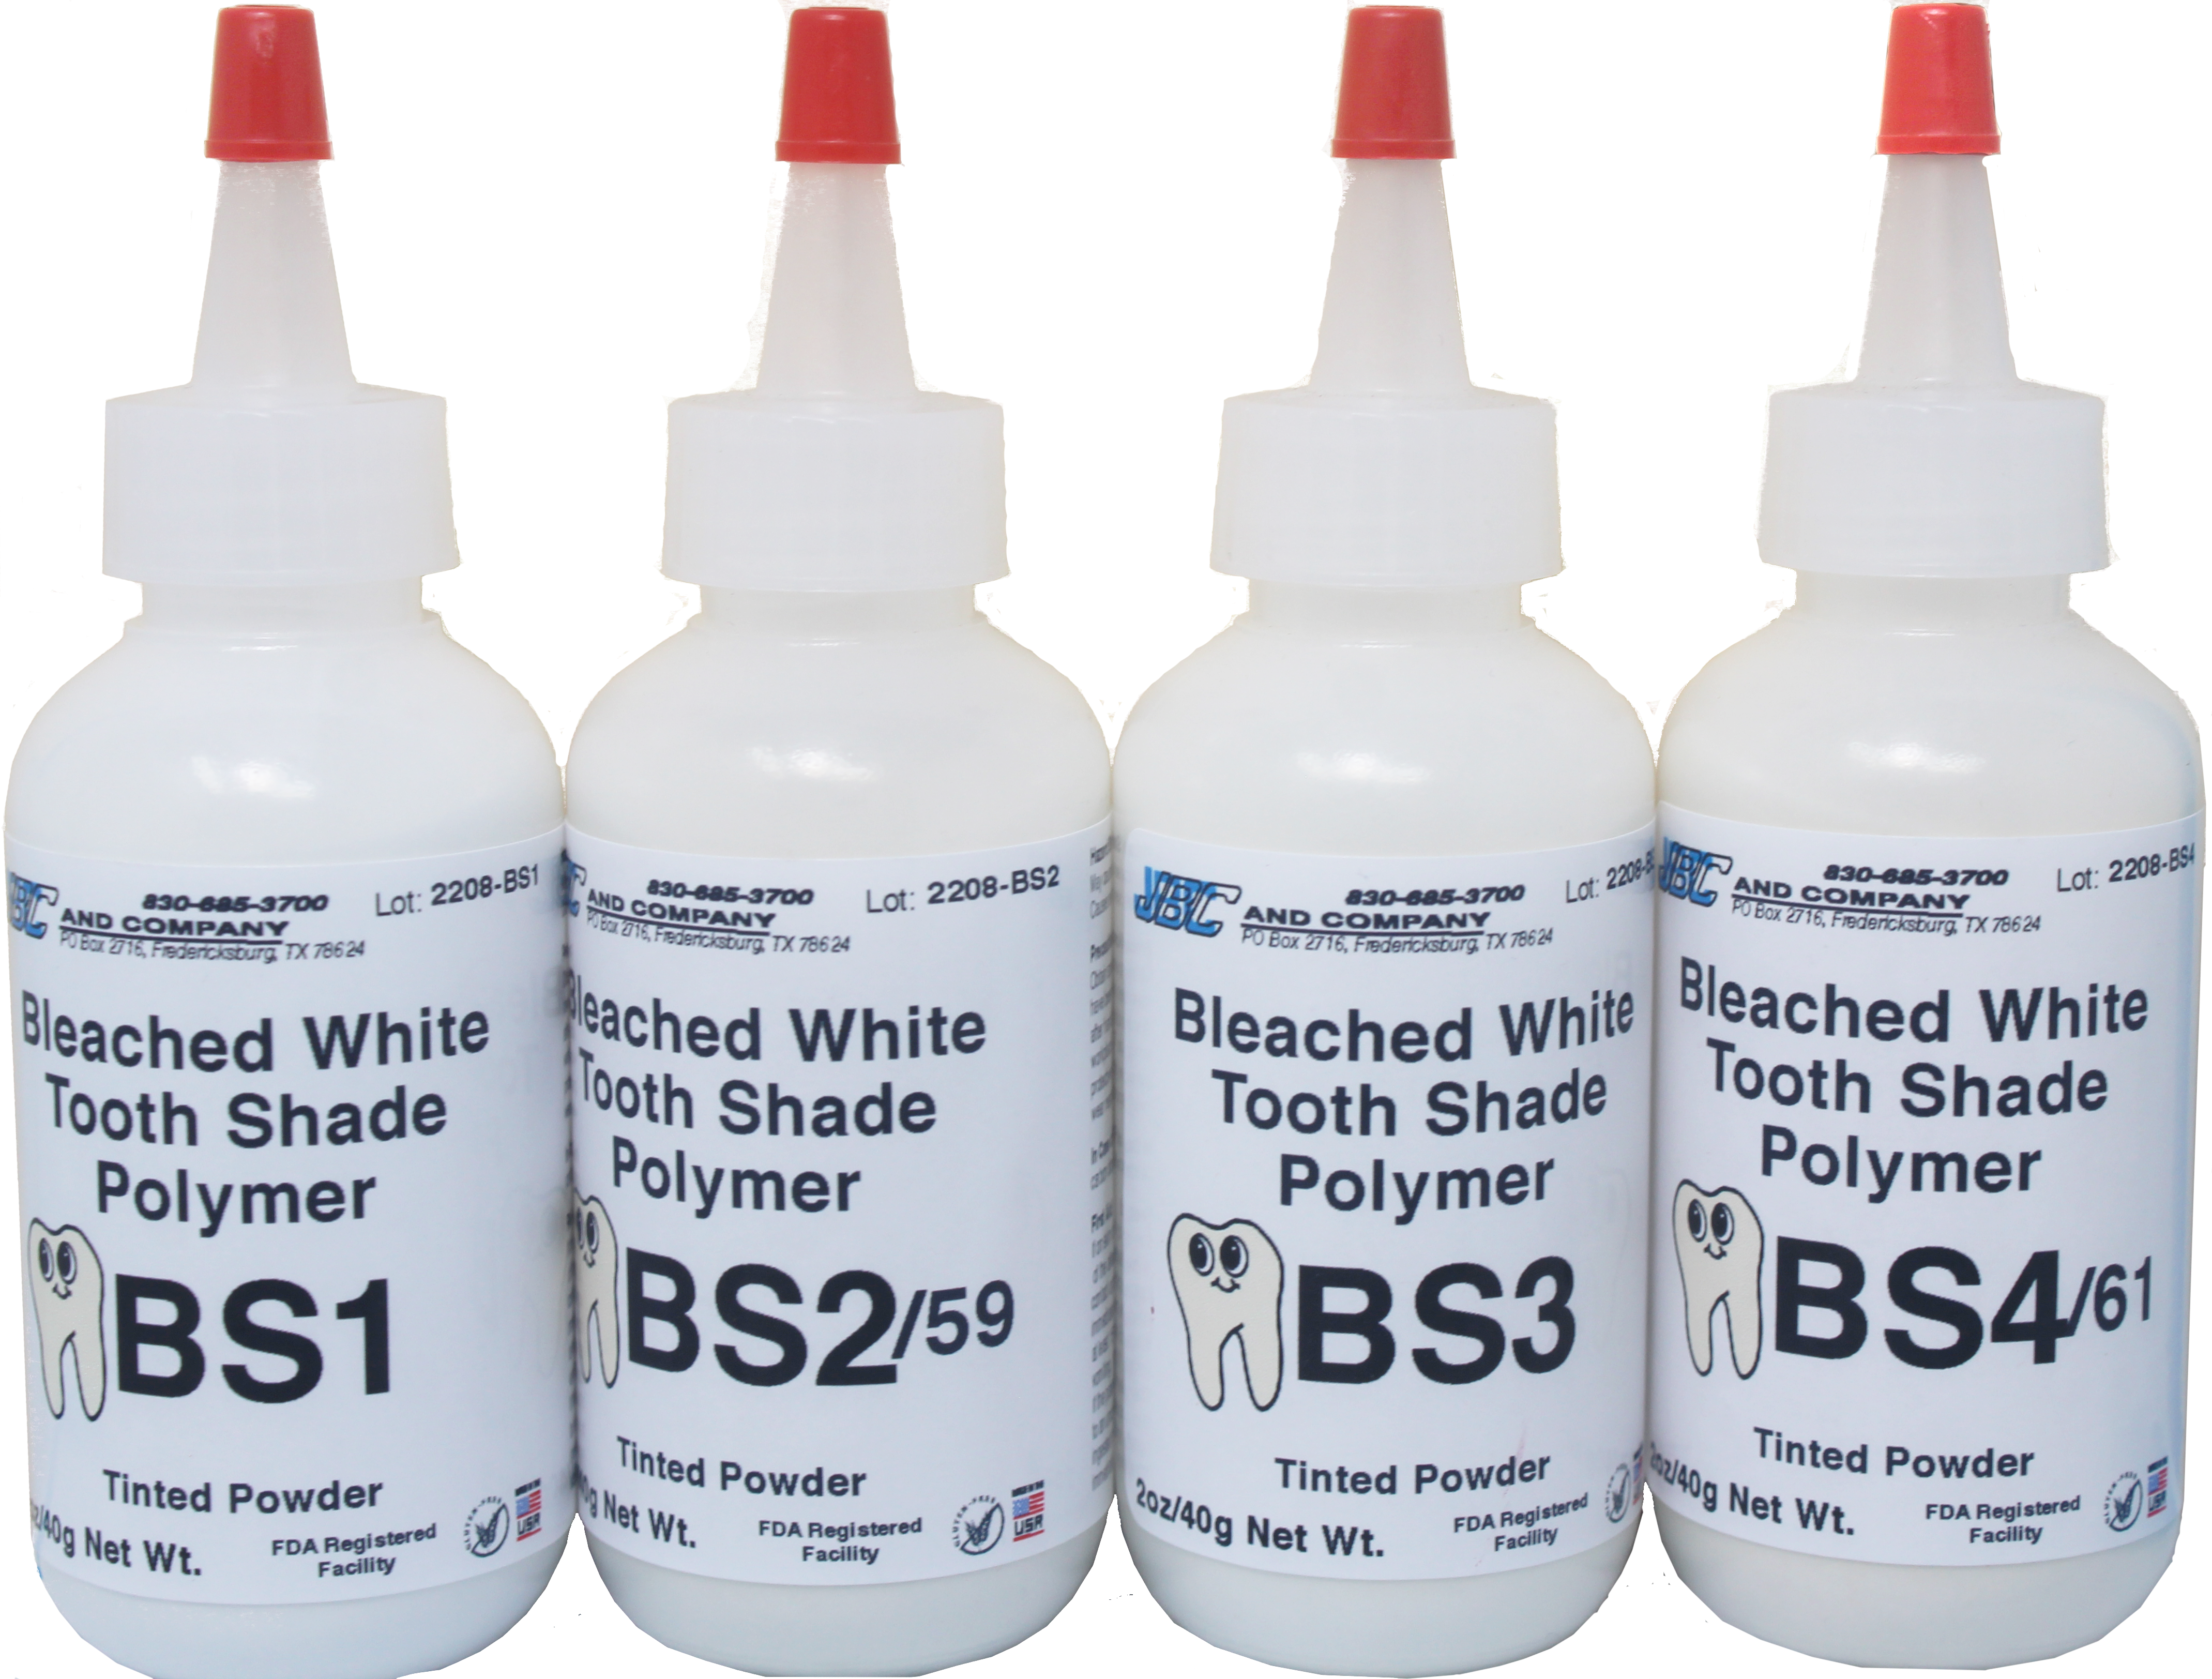 BS: "BLEACHED" SHADES COLD CURE POWDER